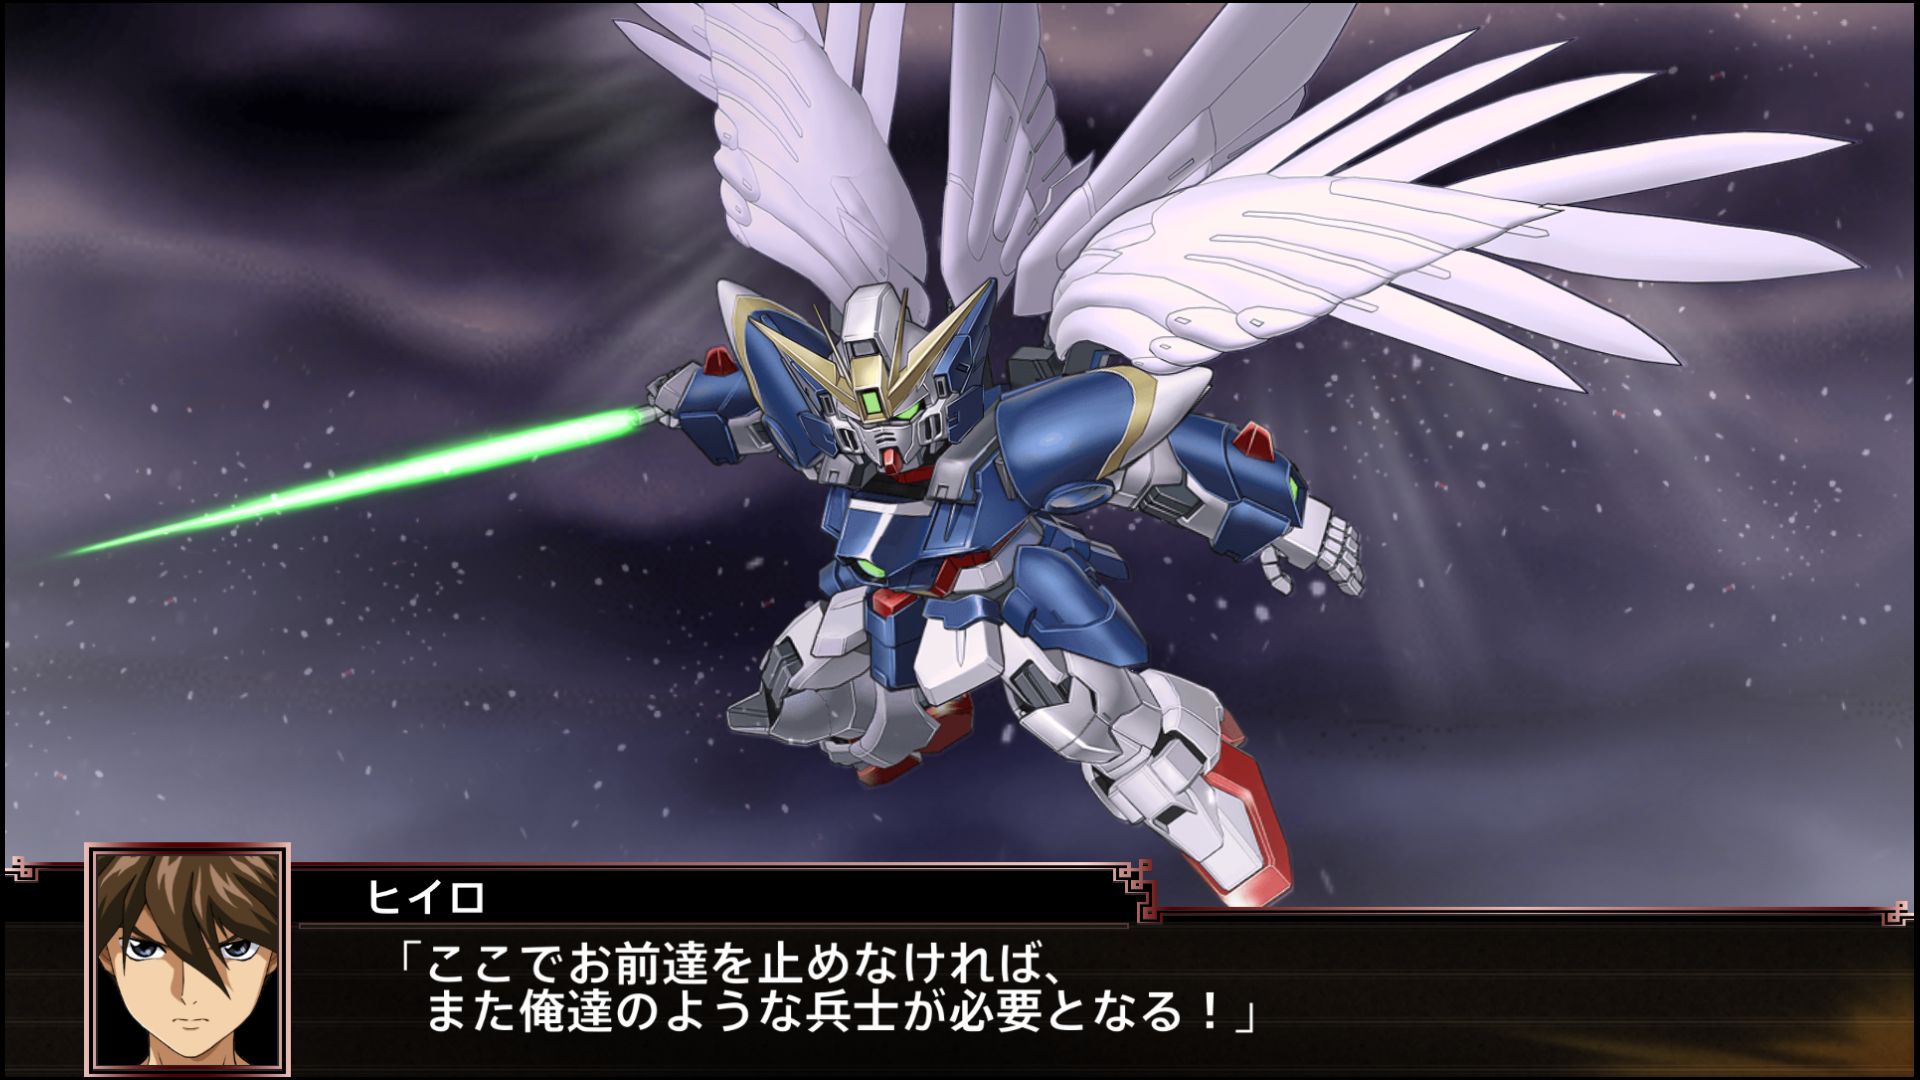 Super Robot Wars Super Robot Wars X Coming to Steam and Switch